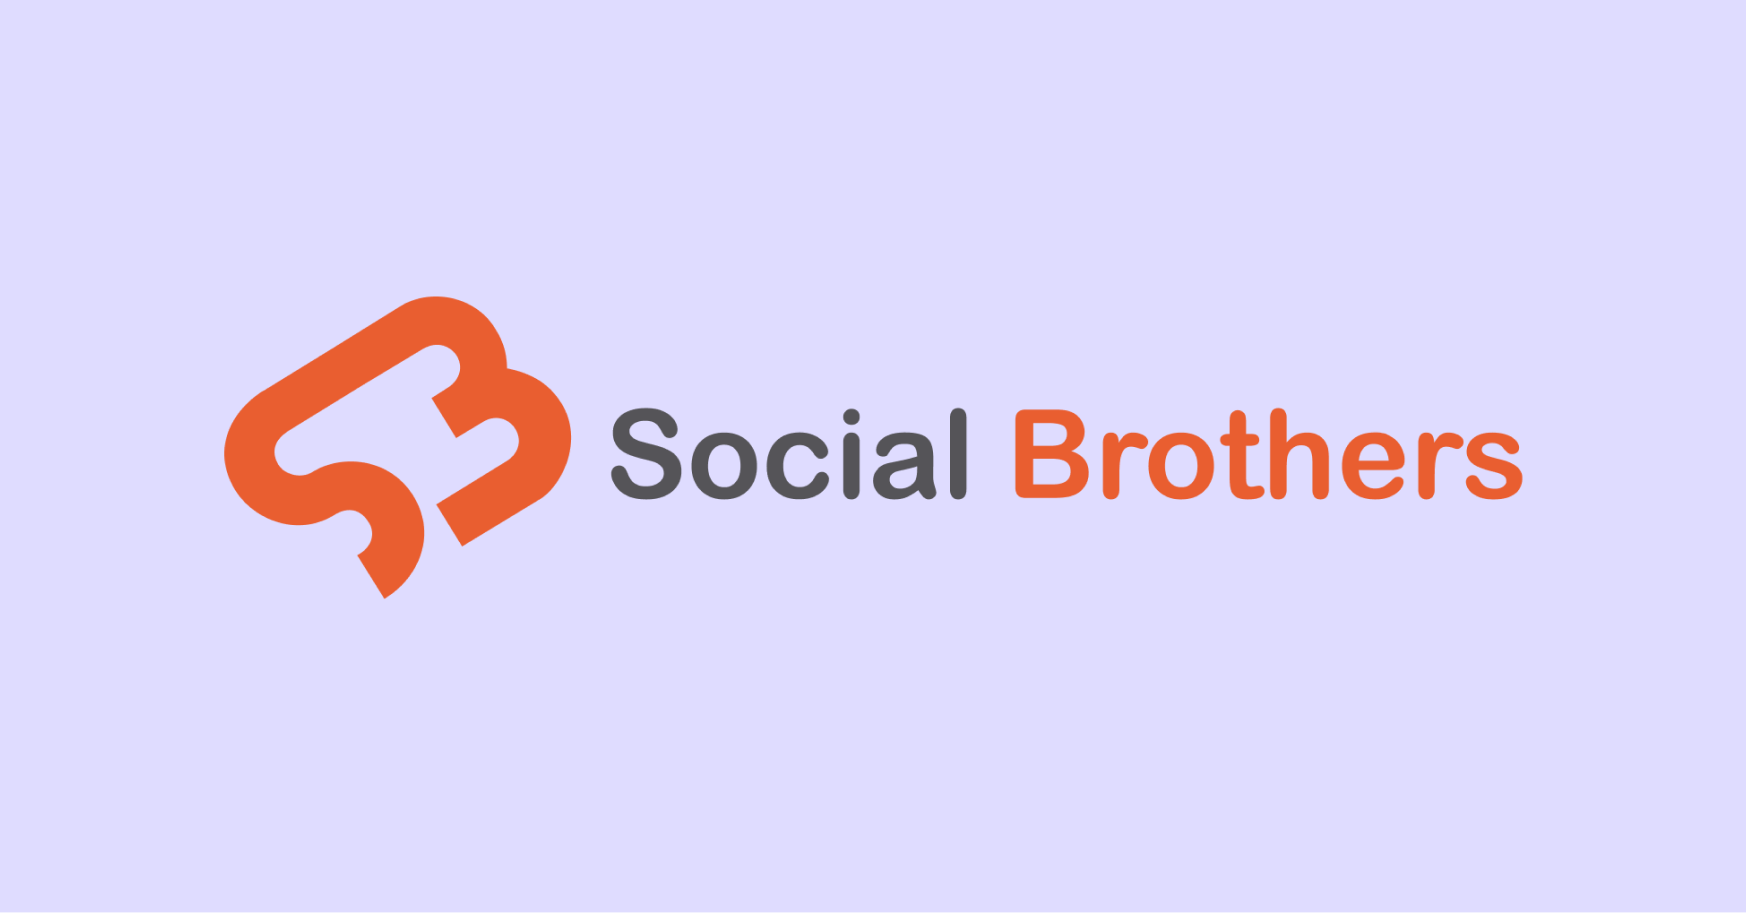 Agency Social Brothers Logo with background